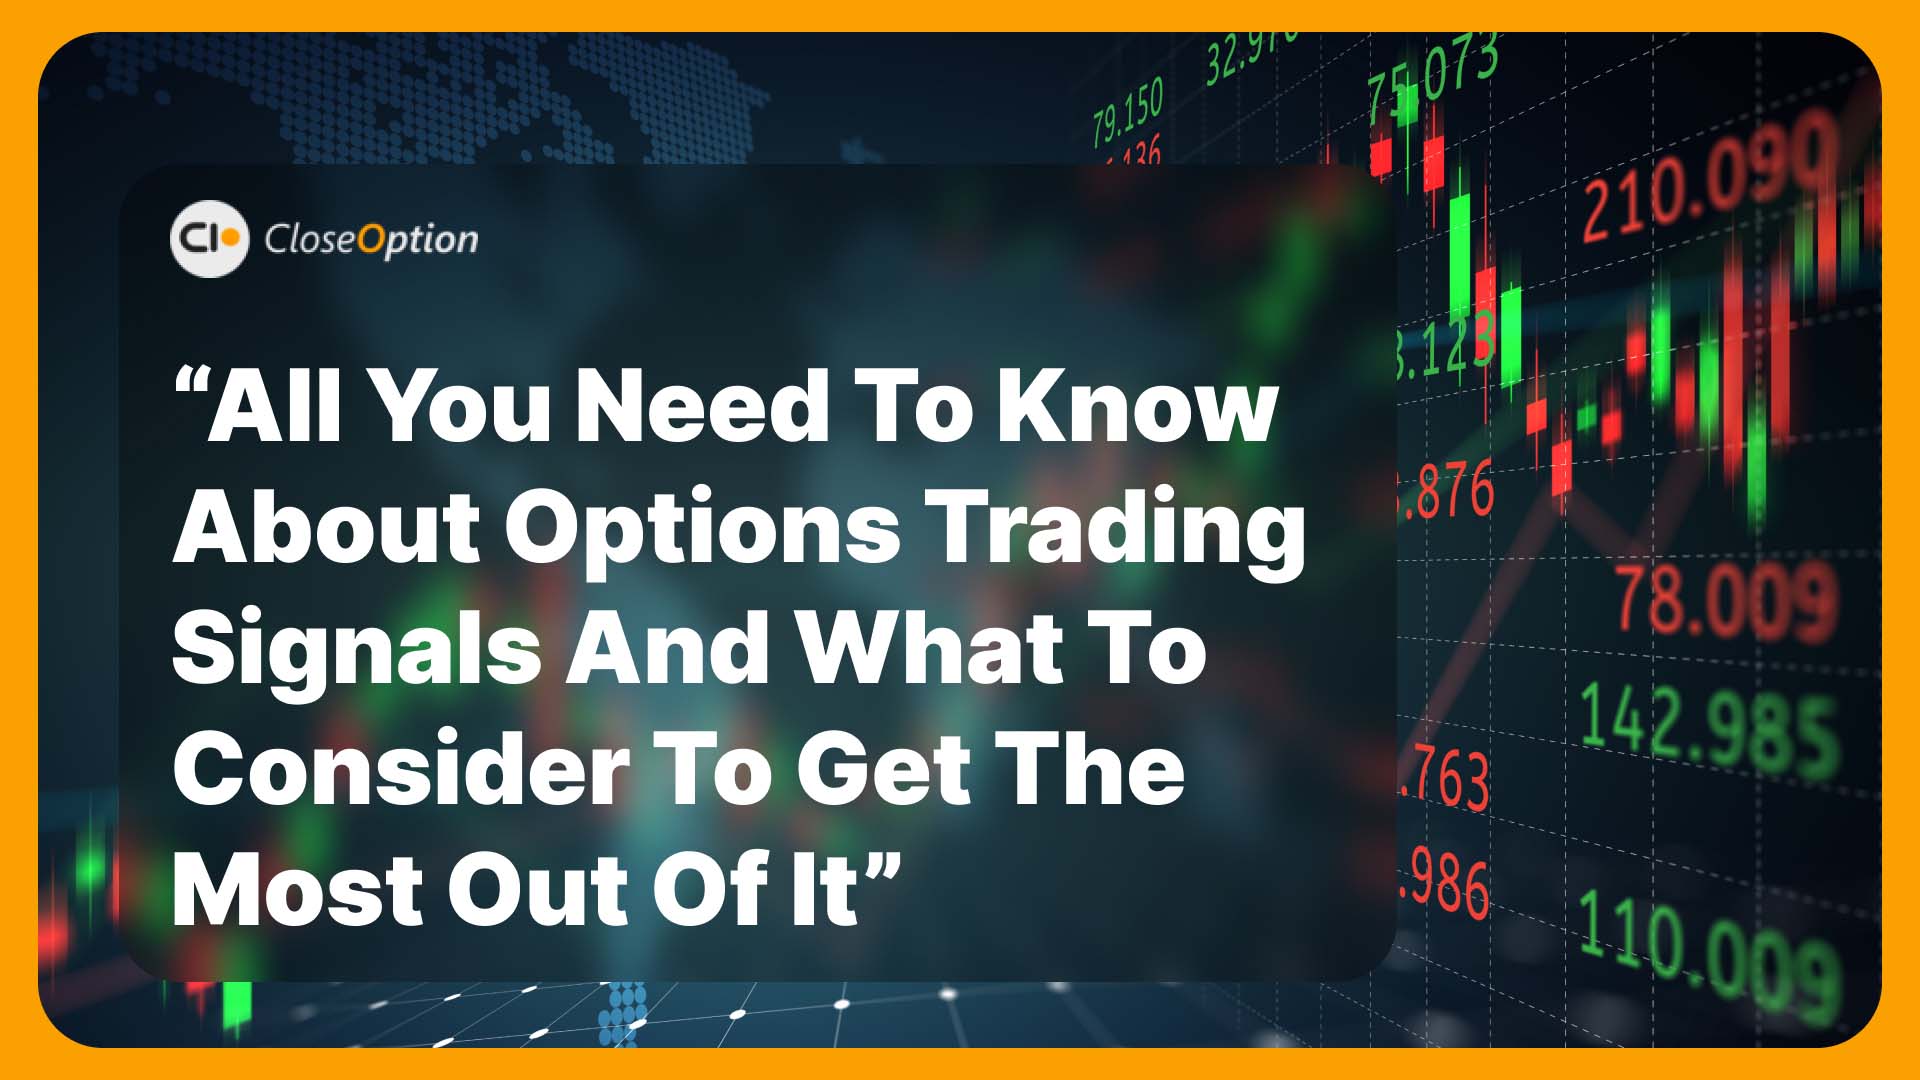 All You Need to Know About Options Trading Signals and What to Consider to Get the Most Out of It